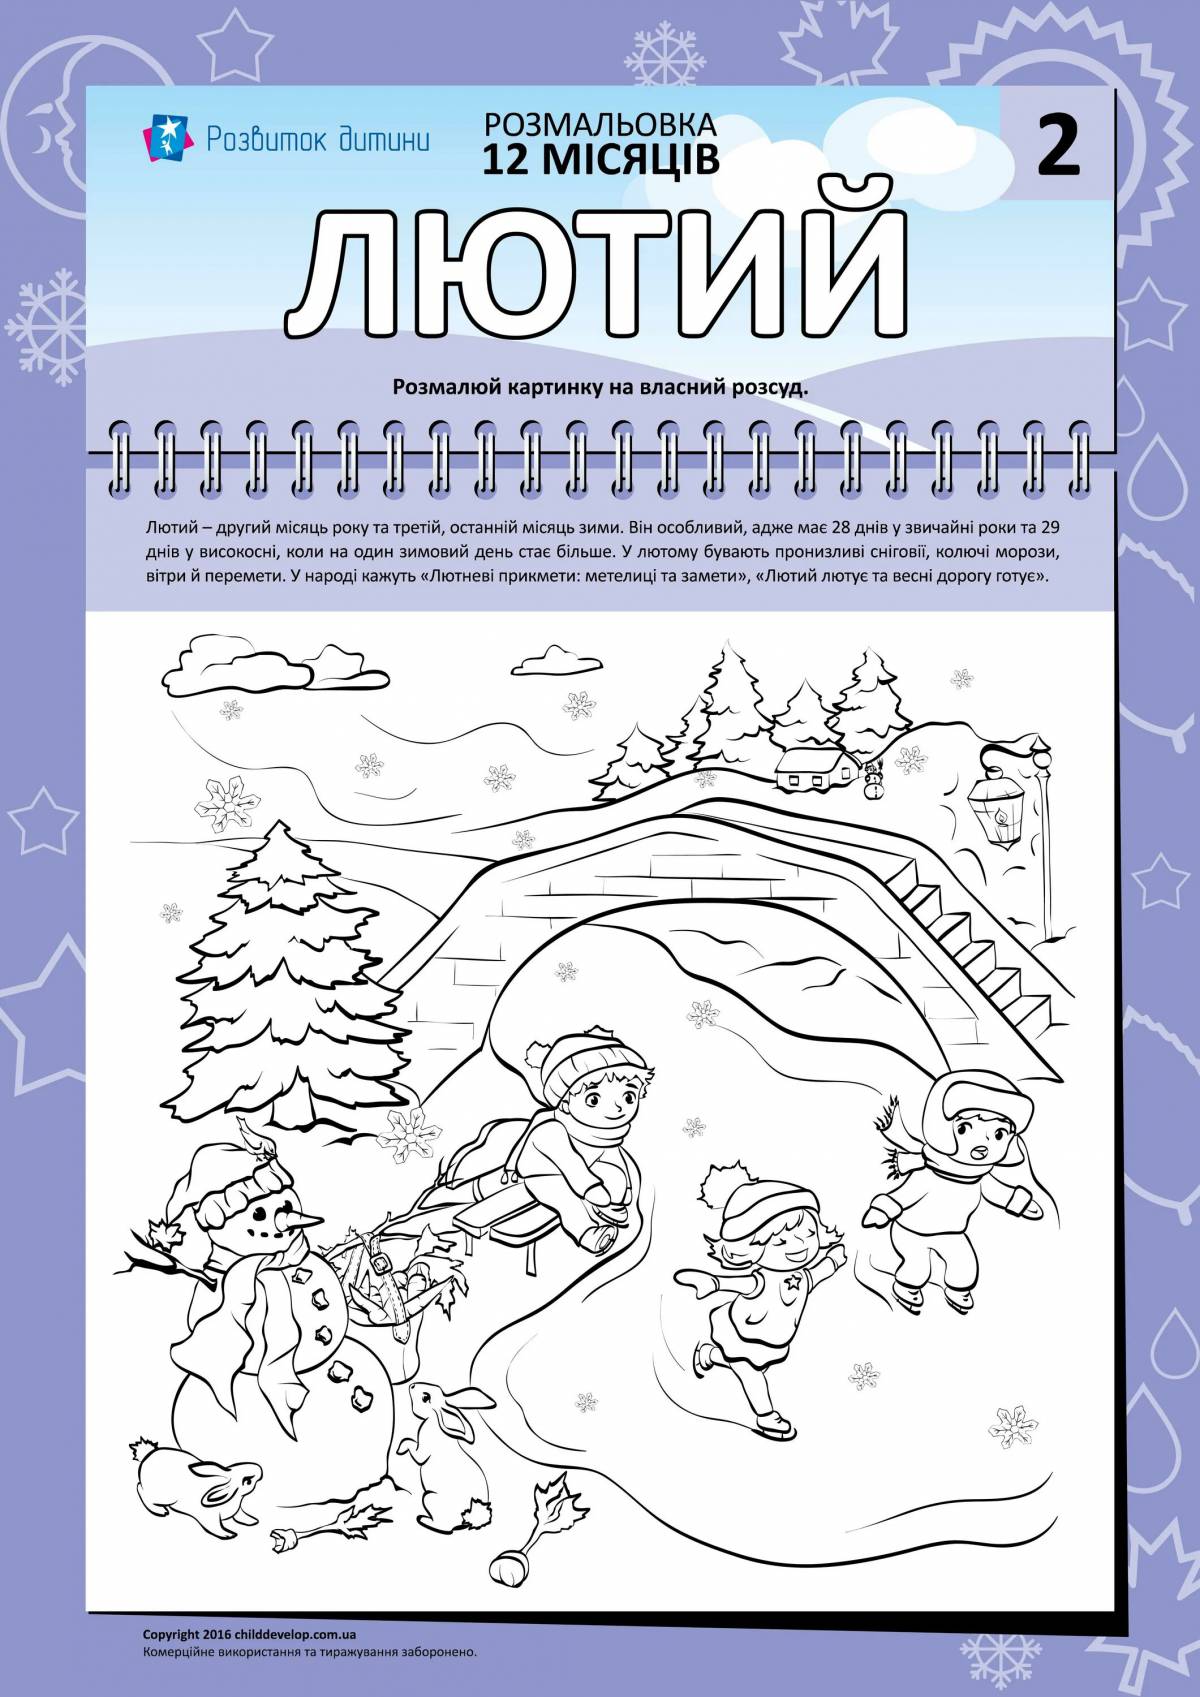 Cozy December coloring book for kids